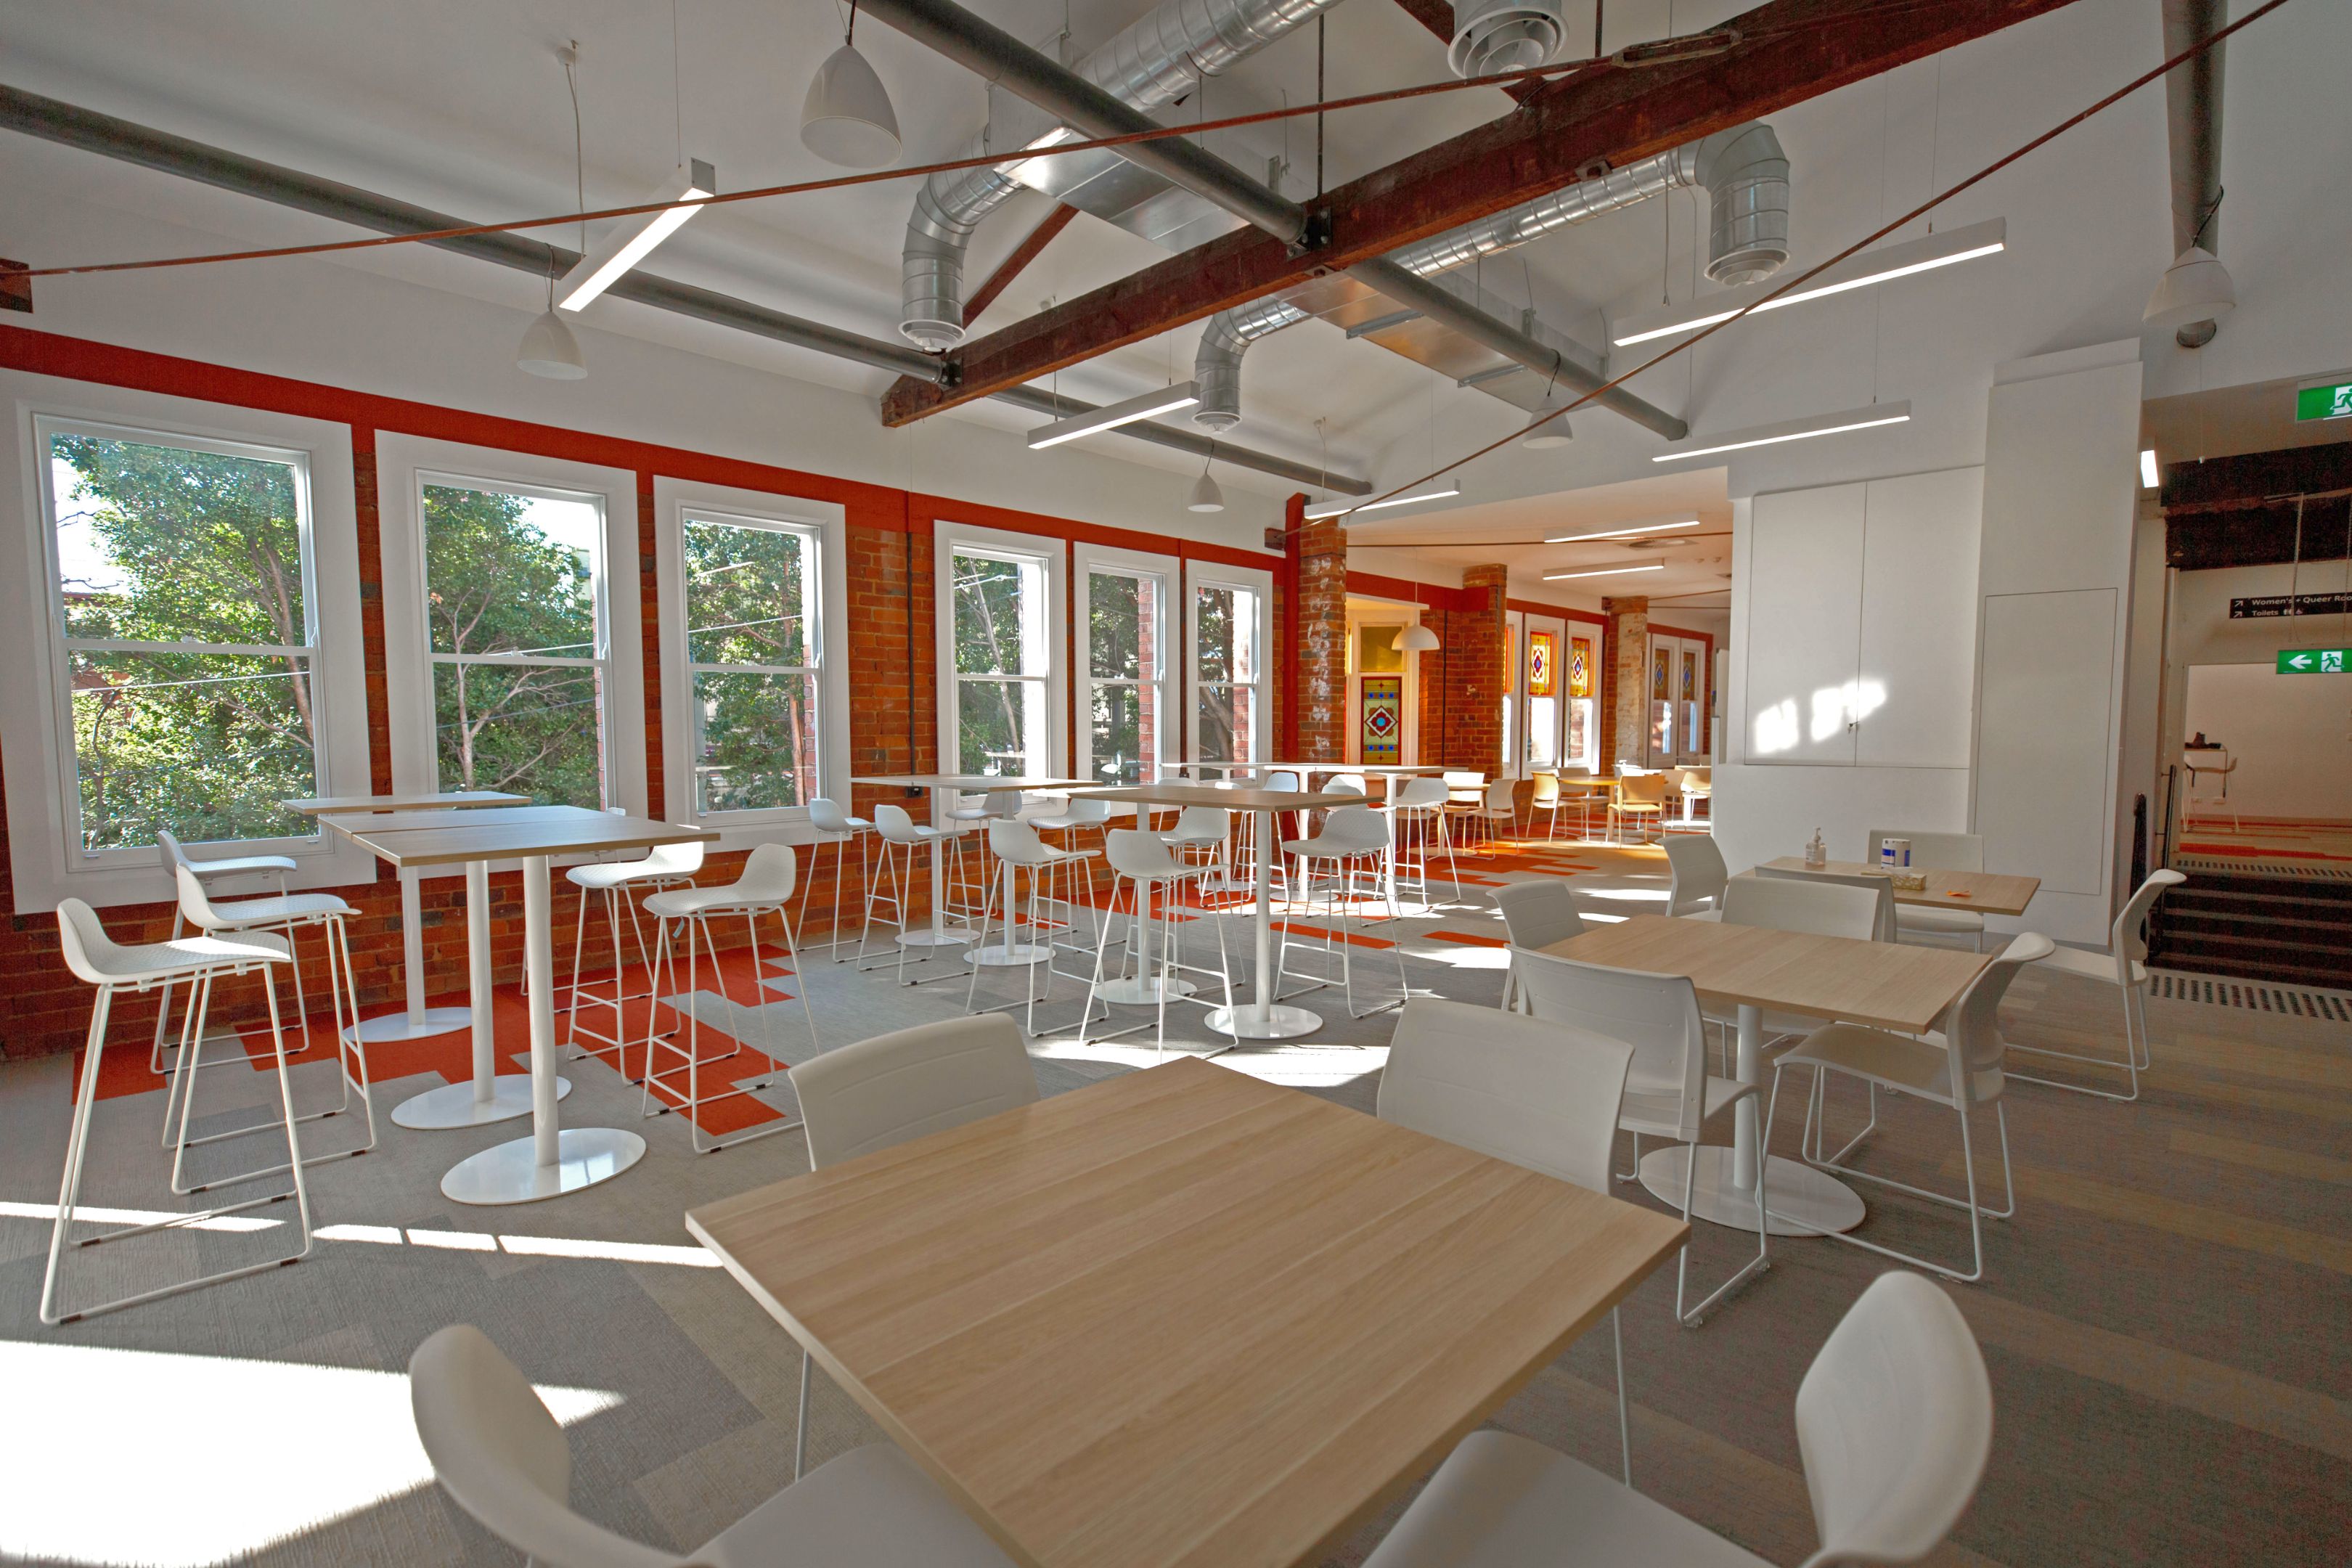 A large open study space, filled with natural light, white chairs and light timber tables